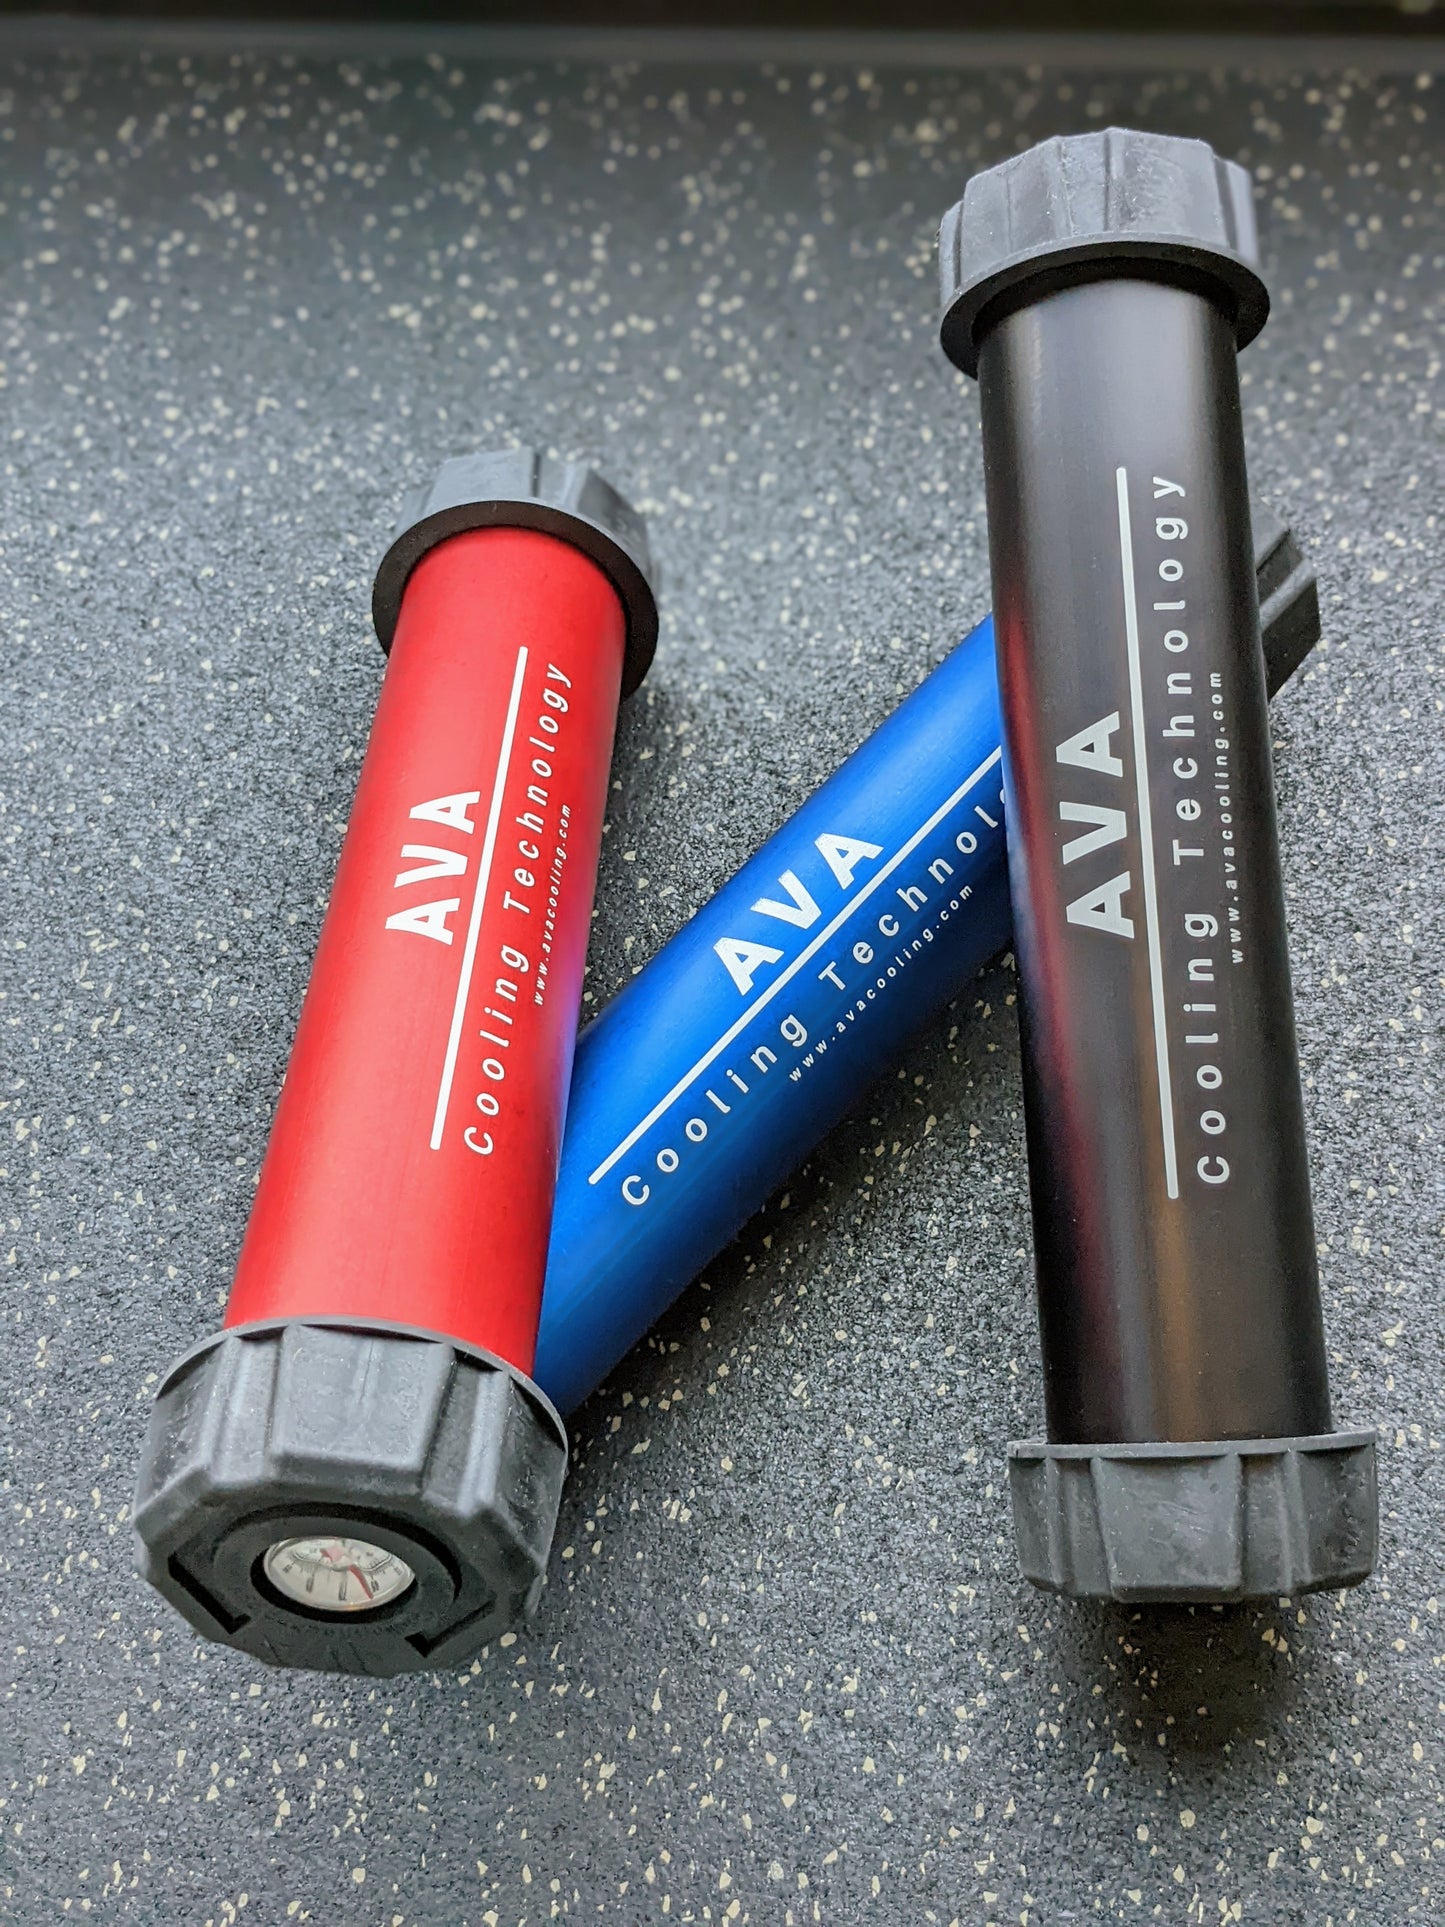 3 colorways of the new palmar cooling device from AVA Cooling Technology